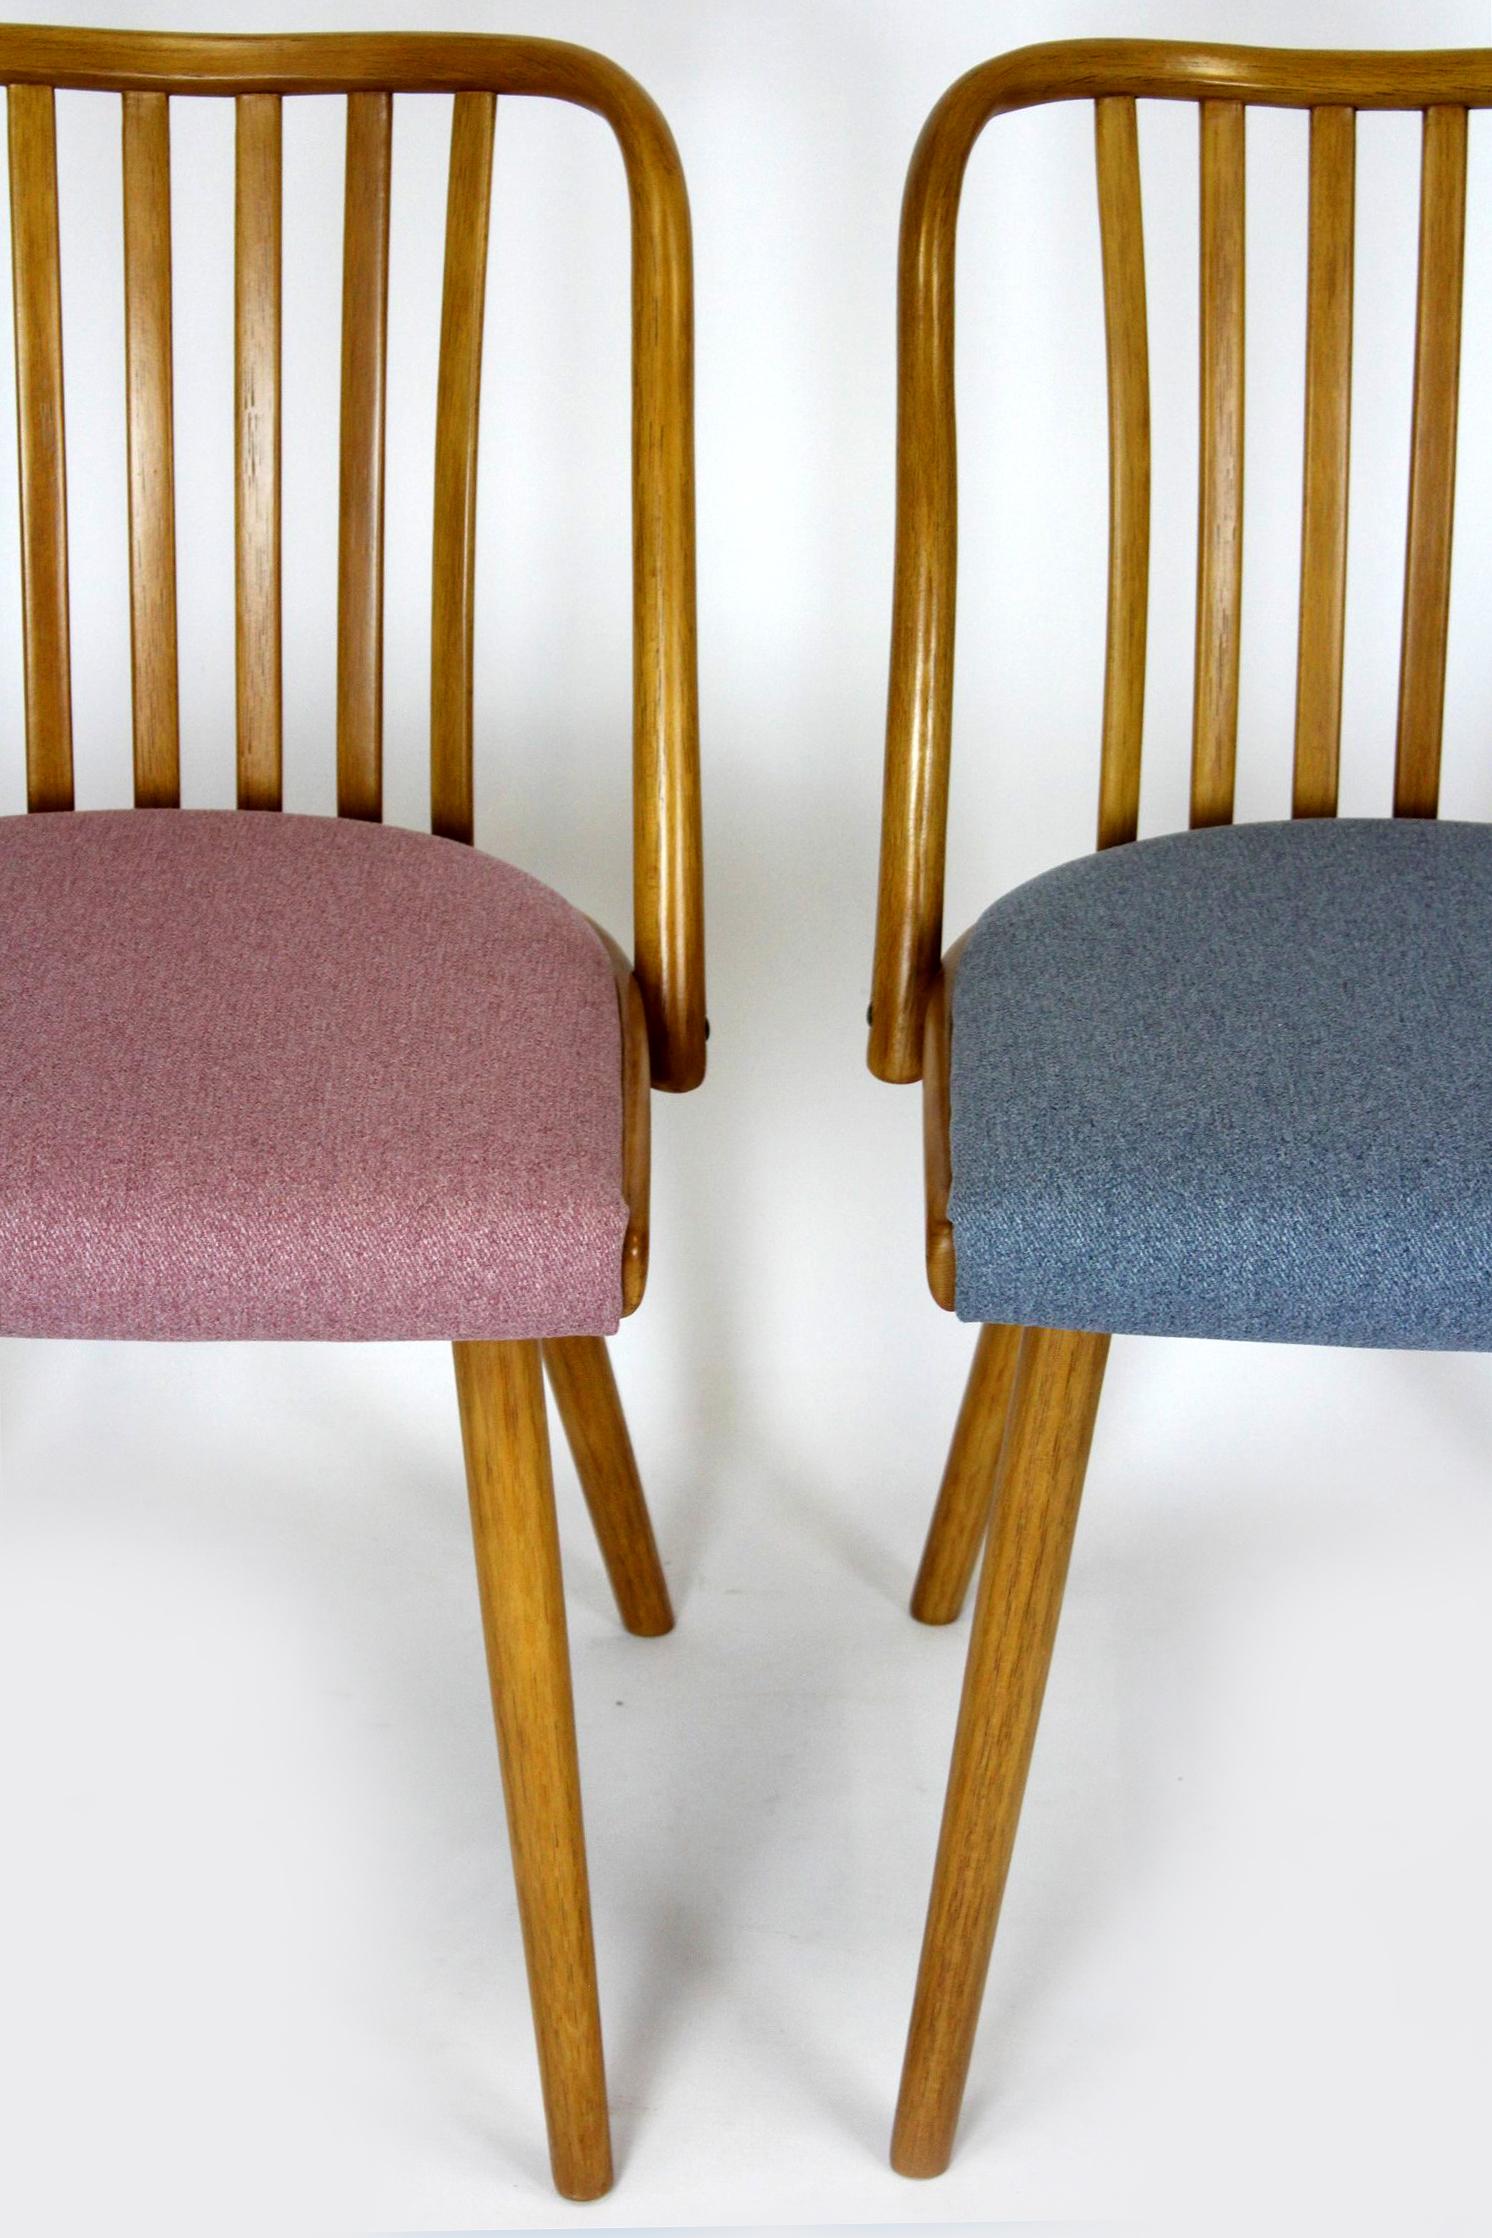 A set of four chairs made of bent beech wood. Produced in the 1960s by TON (formerly Thonet) in Czechoslovakia. The chairs have been completely restored, lacquered in a satin finish, upholstered in a new high-quality fabric in four different colors.